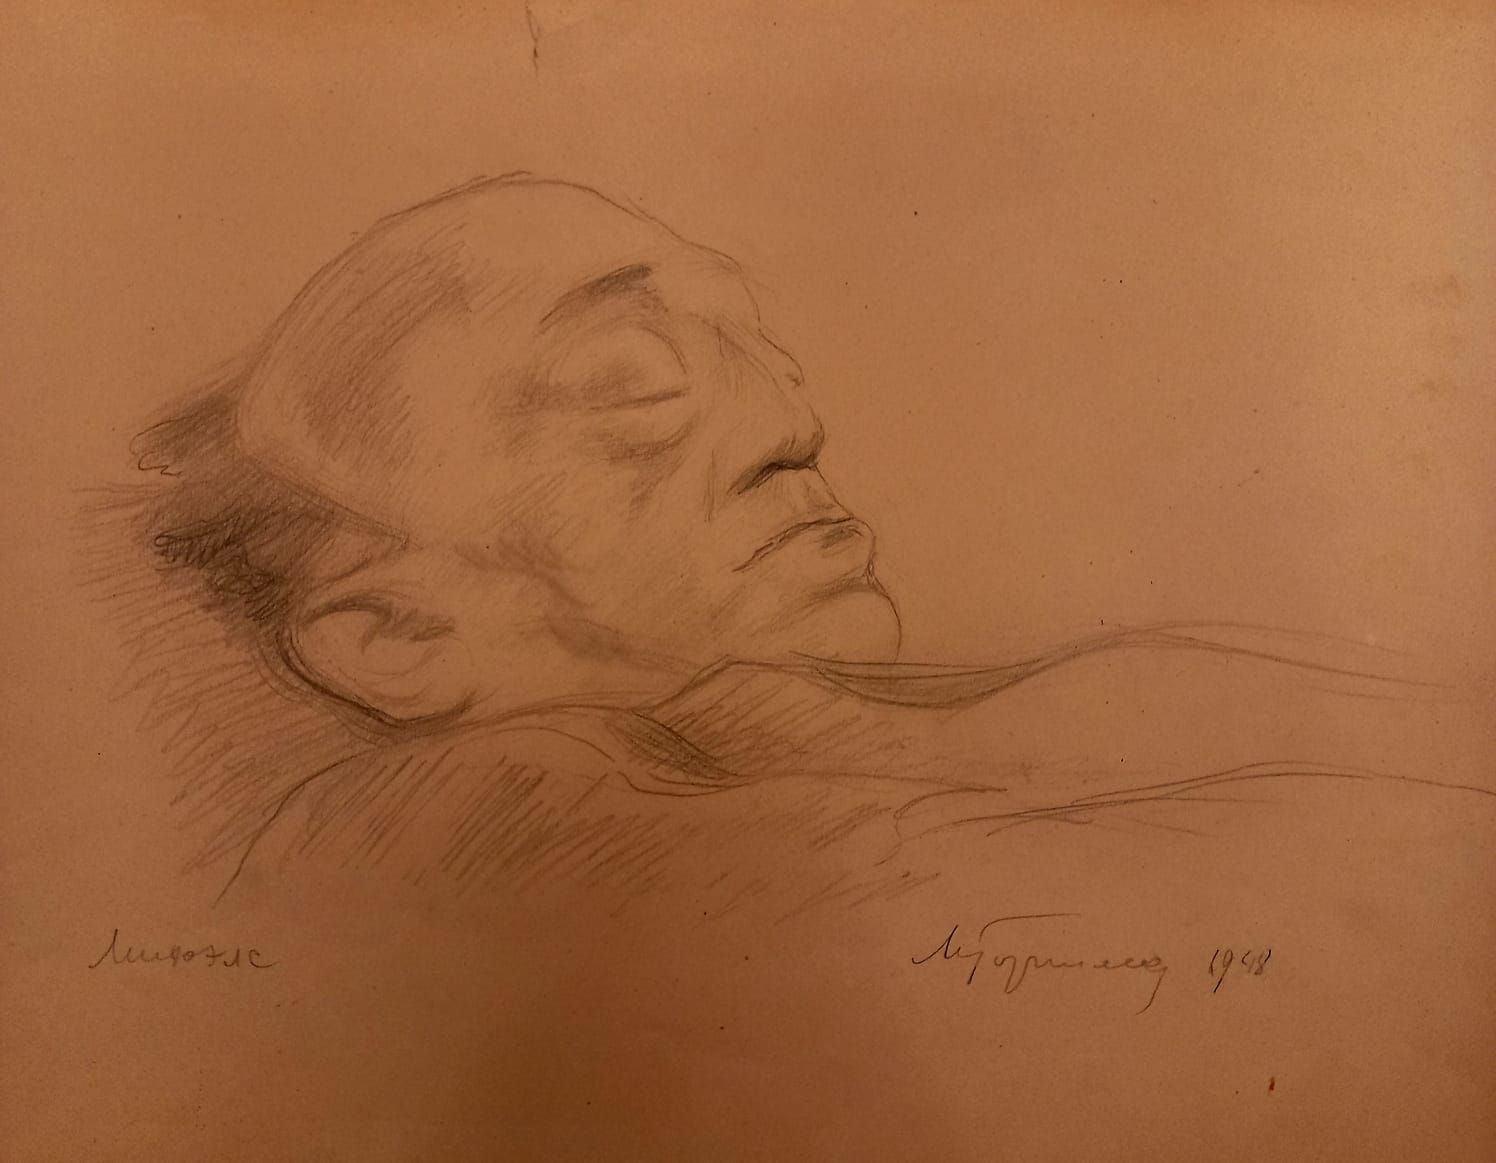 Shloyme Mikhoels after his death, pencil on paper drawing by Mendl Gorshman, 1948 (Donated to the museum by Tanya Rubinstein-Horowitz)